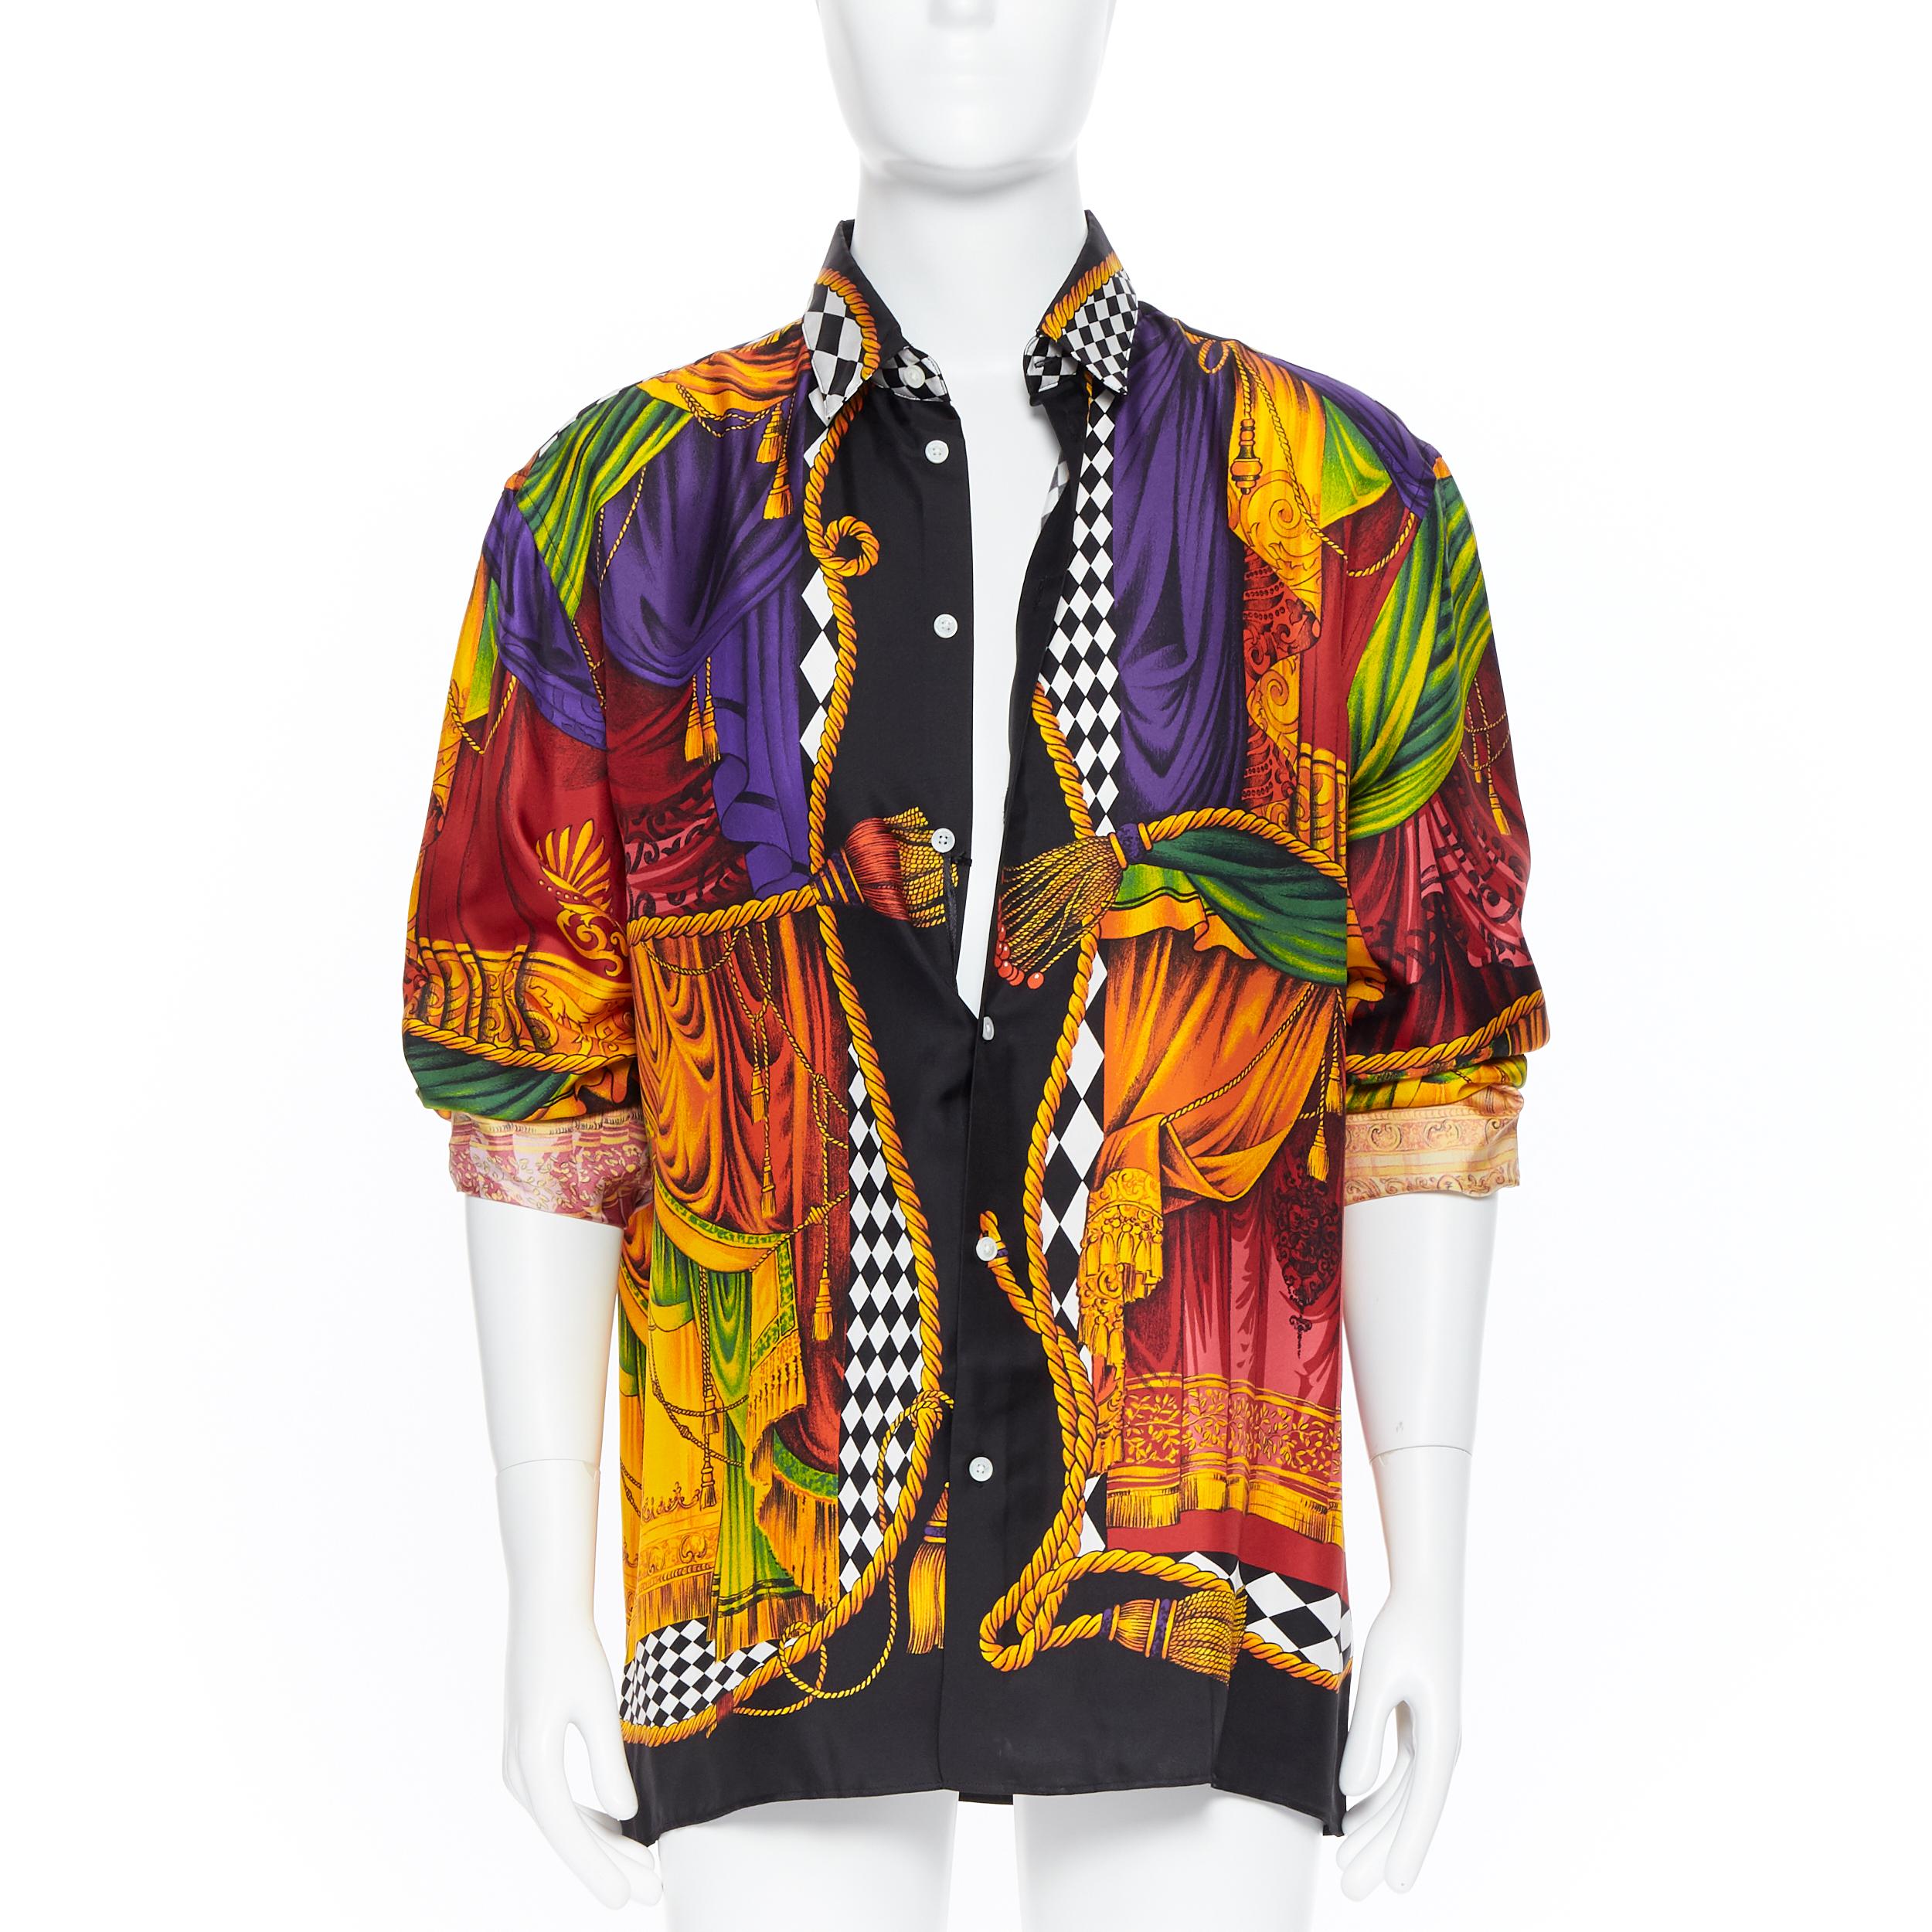 new VERSACE AW18 Runway 100% silk drape curtain gold tassel rope print shirt 3XL
Brand: Versace
Designer: Donatella Versace
Collection: Fall Winter 2018 Look 41
Model Name / Style: Silk shirt
Material: Silk
Color: Multicolour
Pattern: Other; curtain